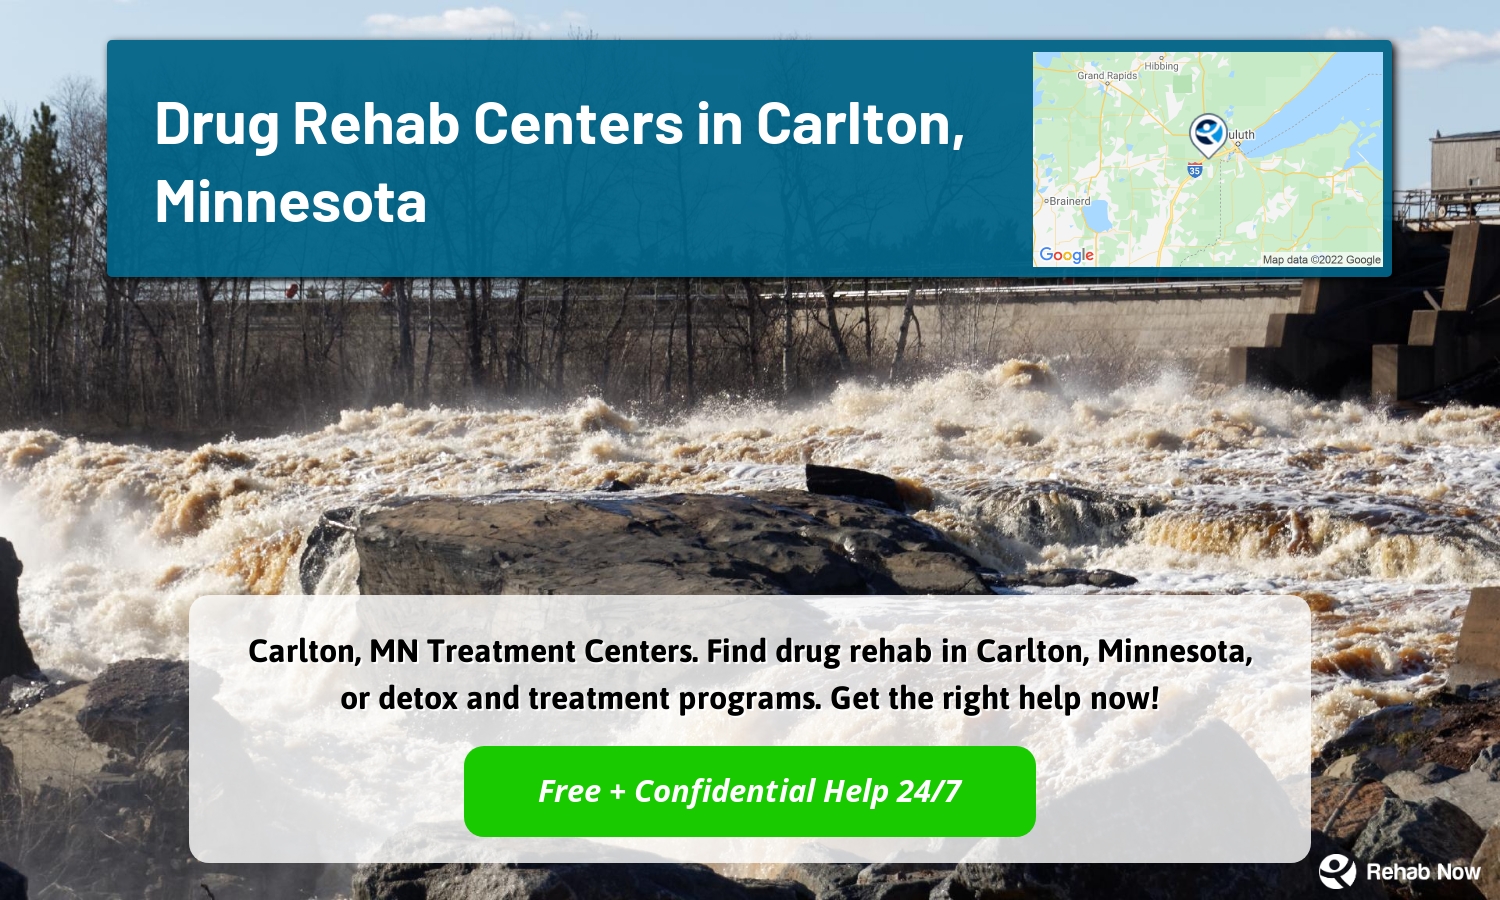 Carlton, MN Treatment Centers. Find drug rehab in Carlton, Minnesota, or detox and treatment programs. Get the right help now!